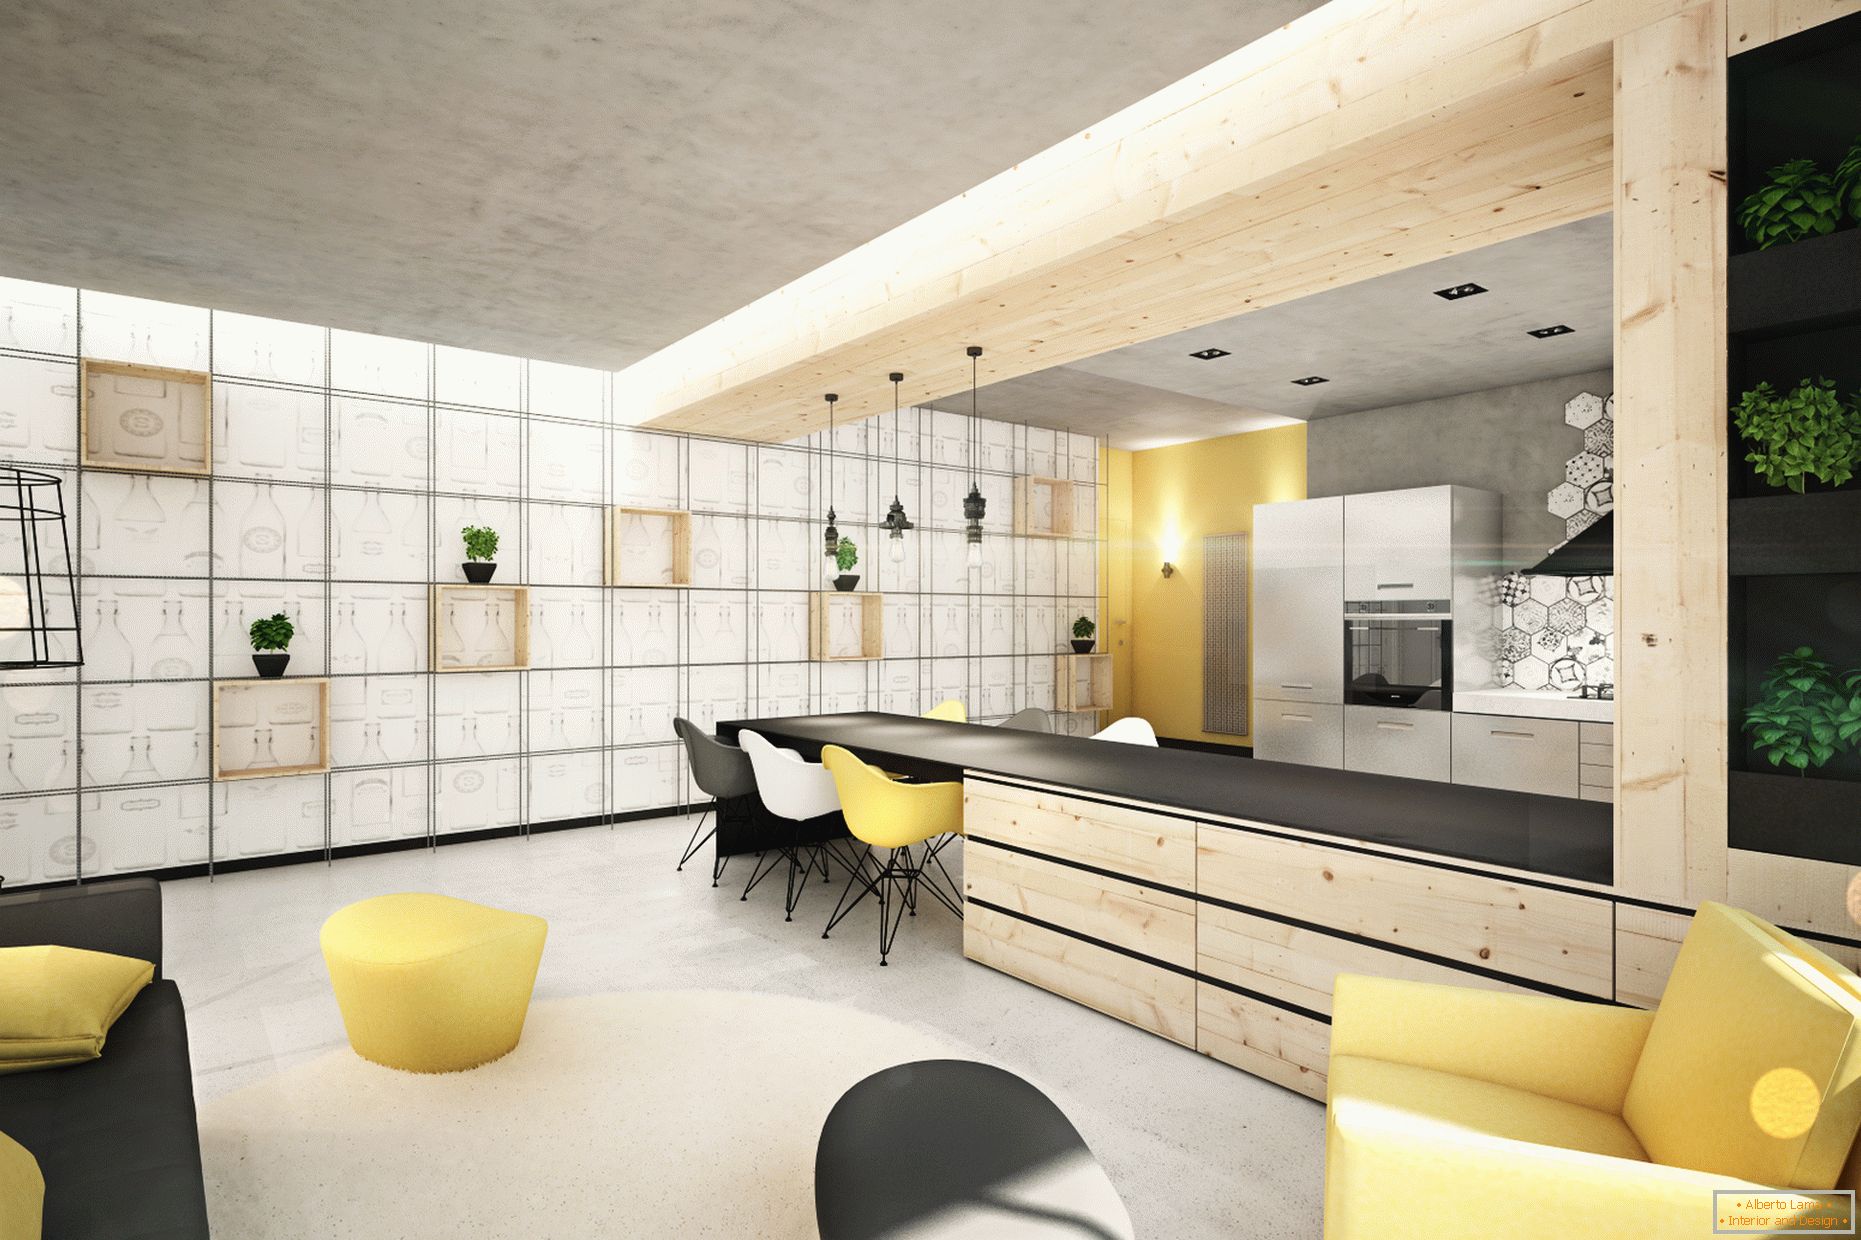 Interior of a small apartment with yellow and black accents